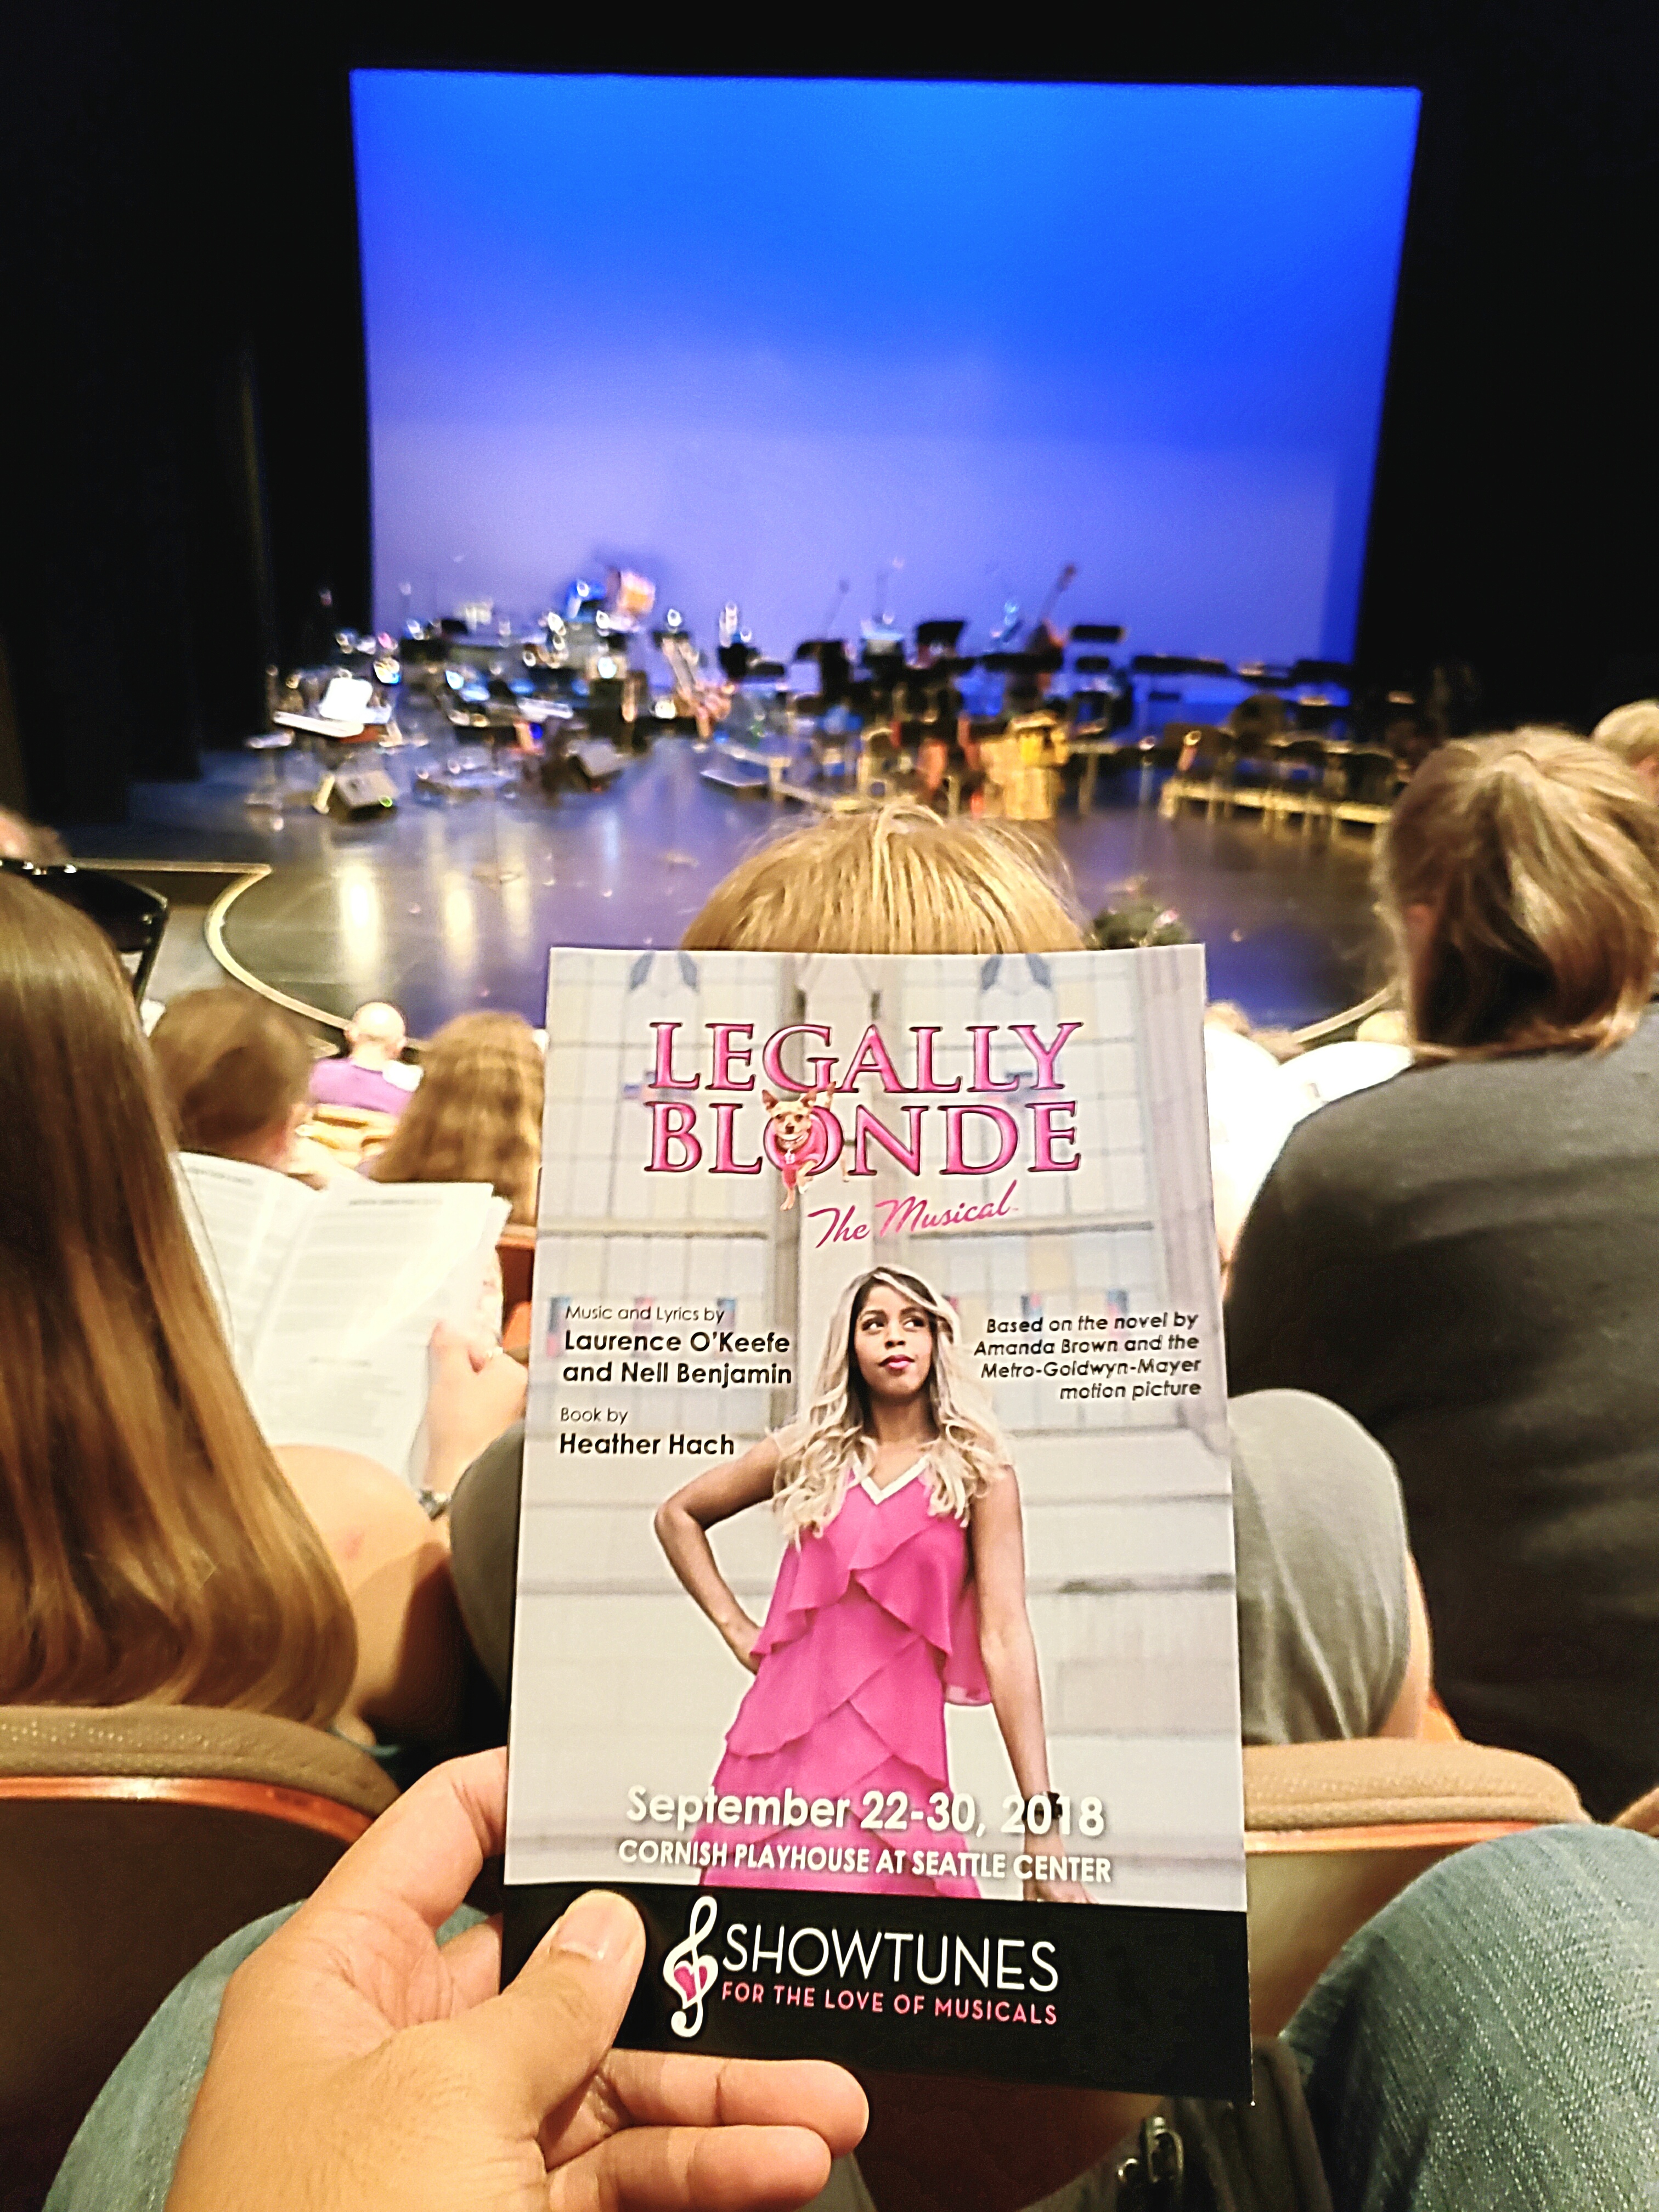 Afternoon matinee of Legally Blonde the Musical in concert. Casting black actresses as Elle Woods and Paulette Bonafonté added a neat twist to this fun musical.